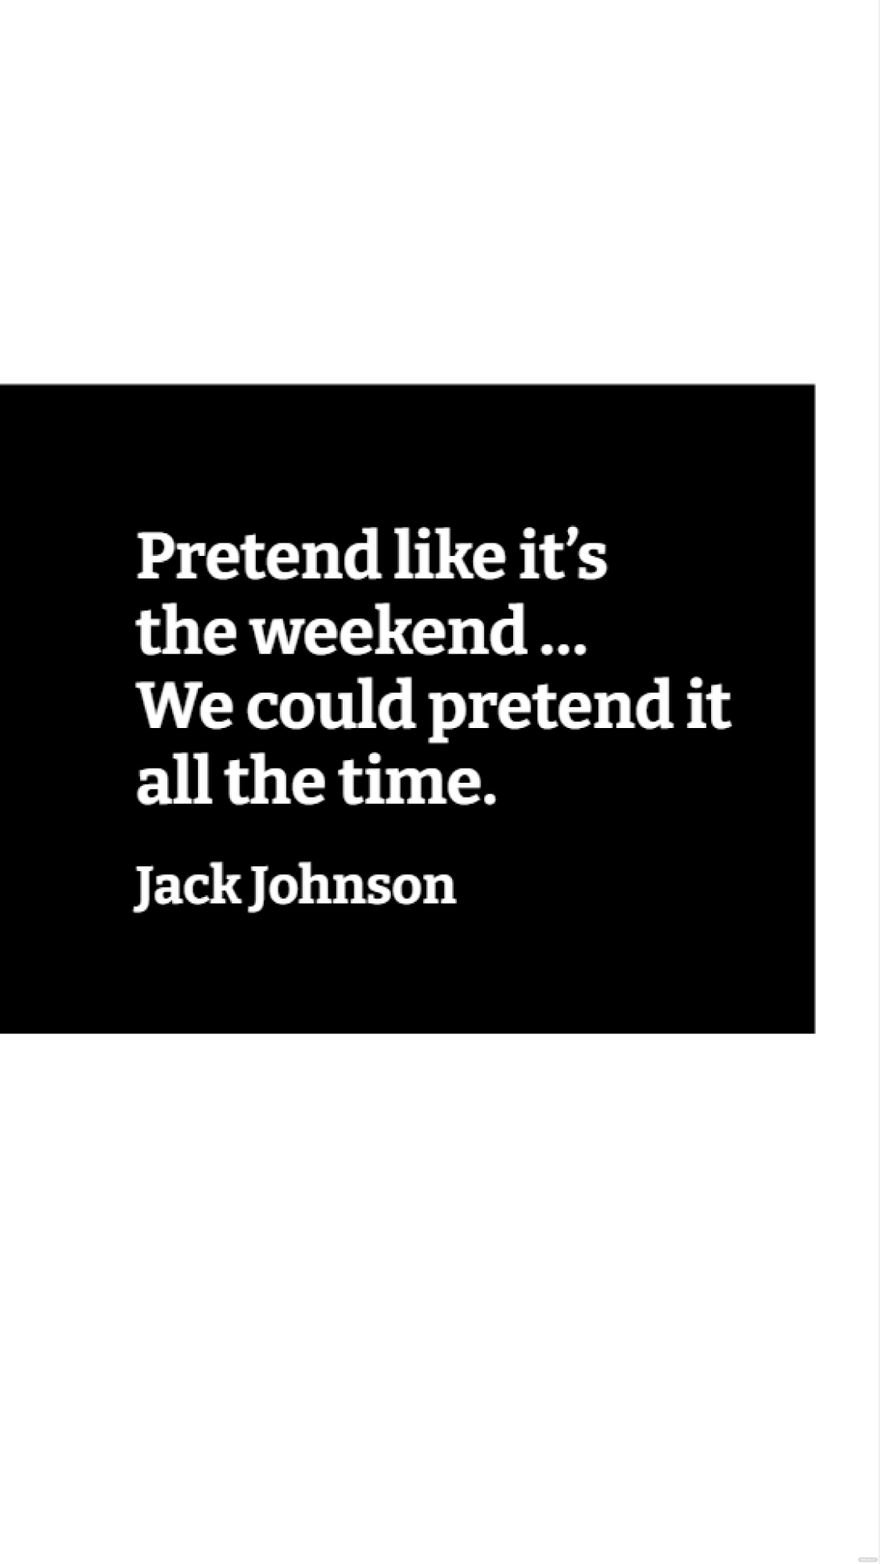 Jack Johnson - Pretend like it’s the weekend … We could pretend it all the time. 